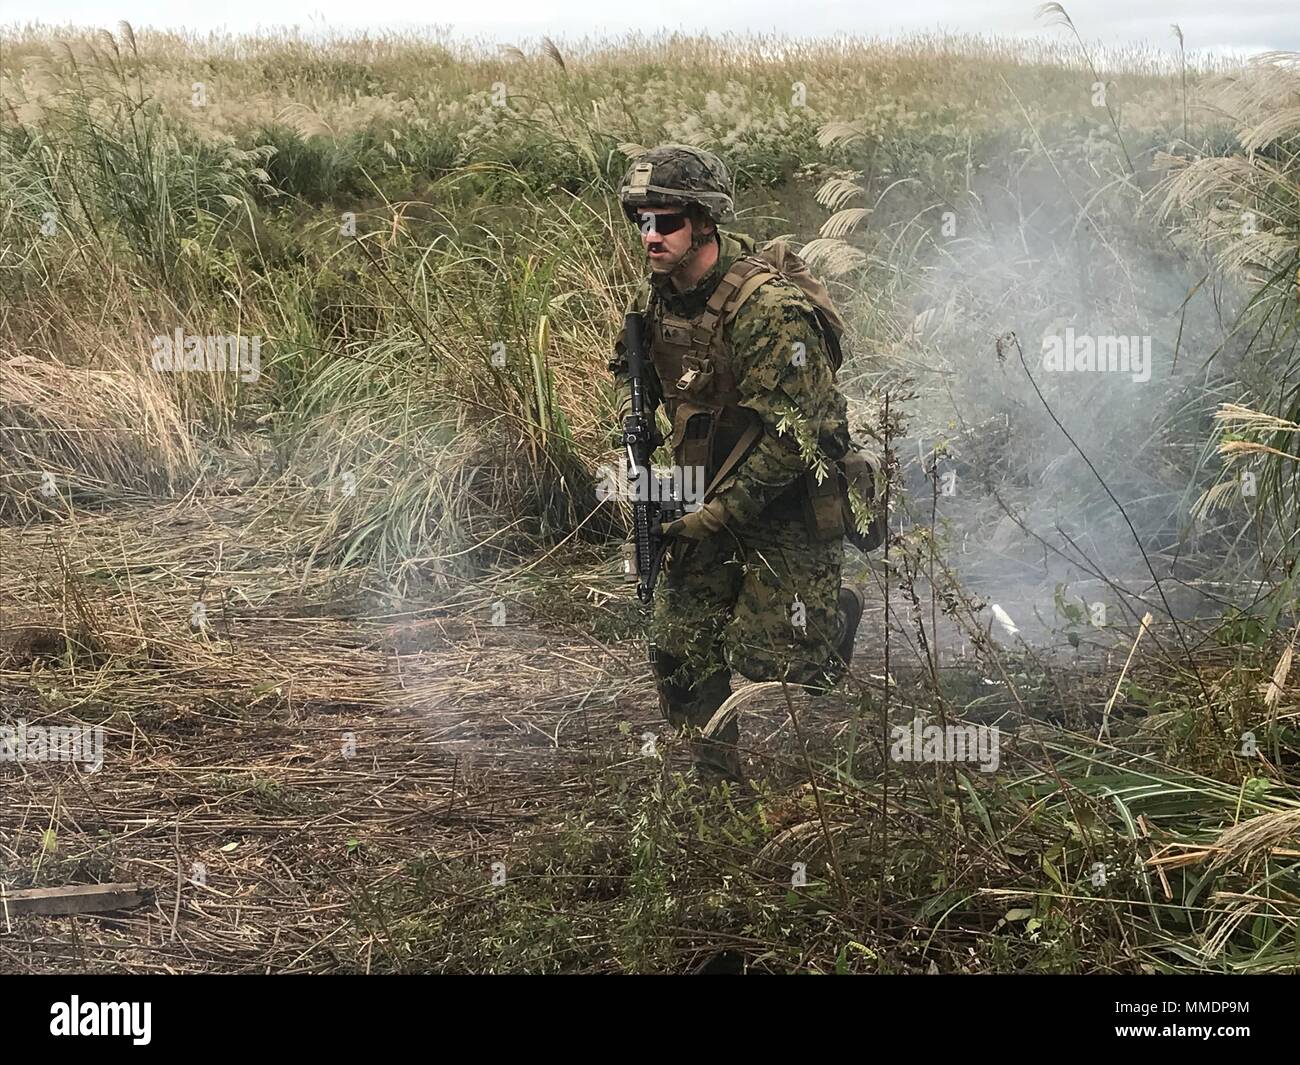 Hagerstown Maryland High Resolution Stock Photography And Images Alamy Visit our page to find out more! https www alamy com us marine cpl urciolo lasher rushes through the platoon attack range during exercise fuji viper at combined arms training center camp fuji japan october 20 2017 the platoon conducted fire and maneuver drills to simulate closing with an enemy that has occupied their defensive position fuji viper is a training exercise where marines conduct live fire and non live fire combined arms training in order to sustain combat proficiency and improve the lethality of the marines in the us pacific command area of operations lasher a hagerstown maryland native is a rifleman with charlie comp image184699696 html